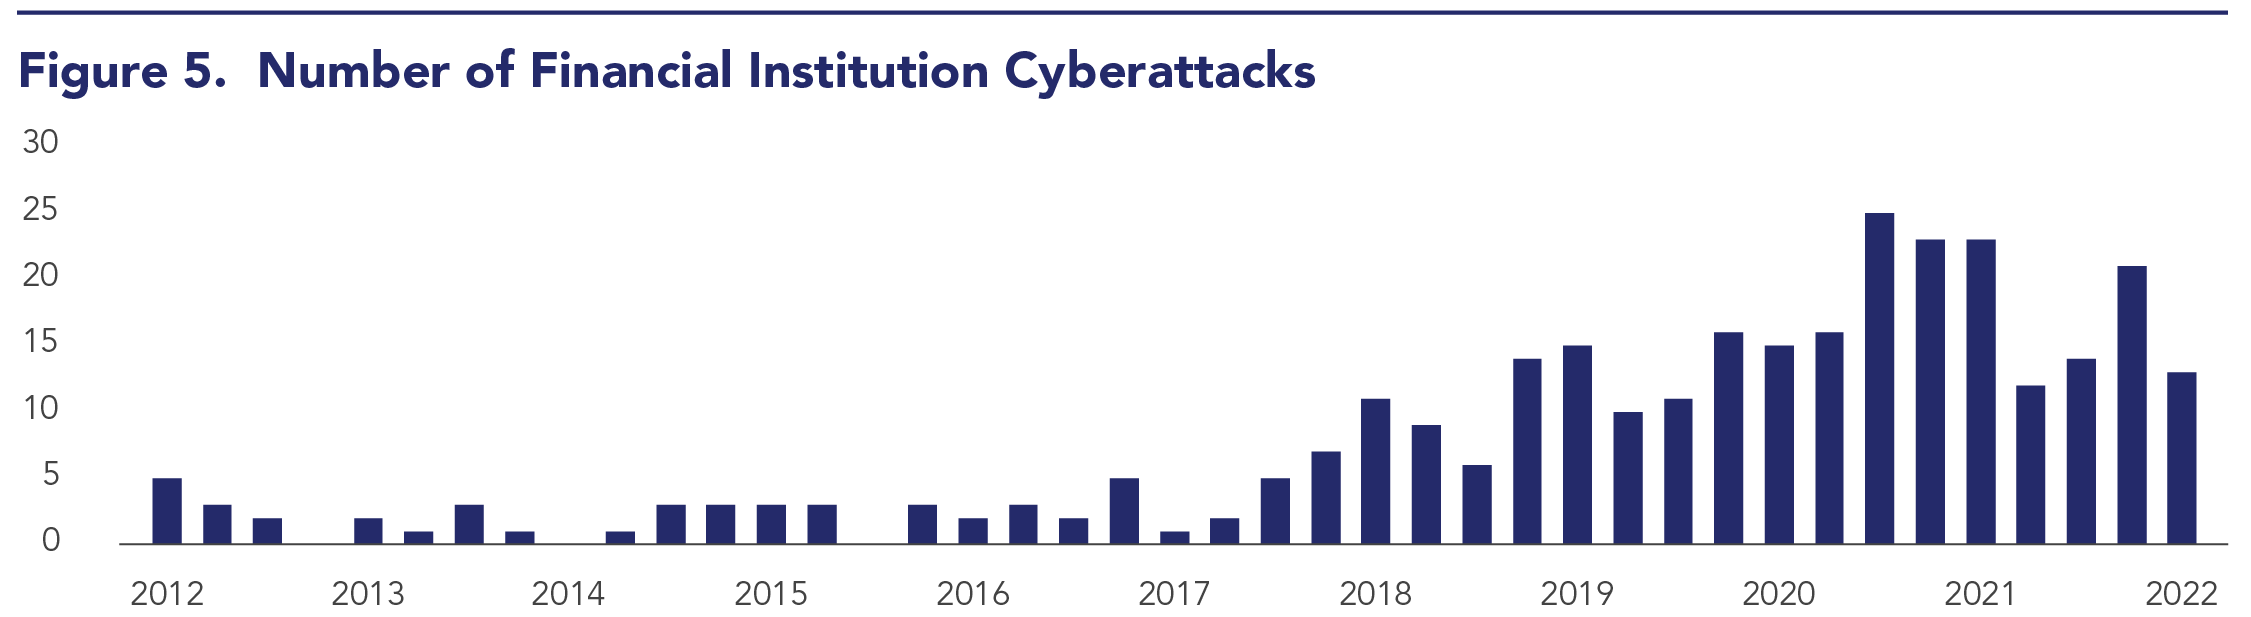 While there are variations in how many attacks happen each quarter, there has been a significant rise in cyberattacks on financial institution since the start of 2017.